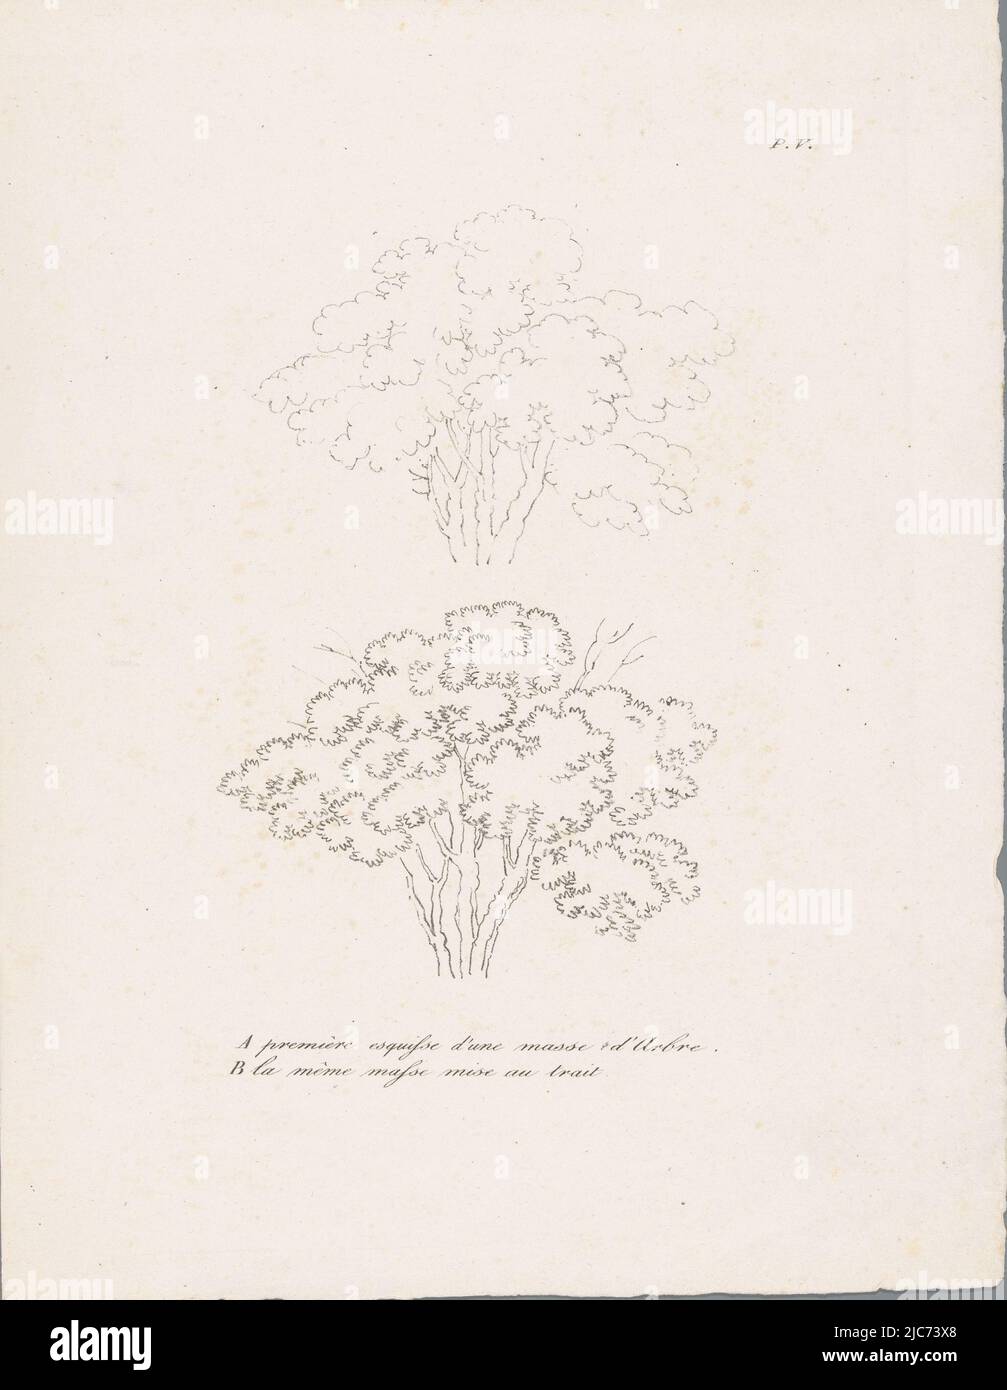 The first and second drawing phases: sketch and line drawing, Study of two treetops in various drawing phases Studies of trees , print maker: J. Bernard, publisher: Gottfried Engelmann, Mulhouse, c. 1820 - 1833, paper, h 304 mm × w 235 mm Stock Photo